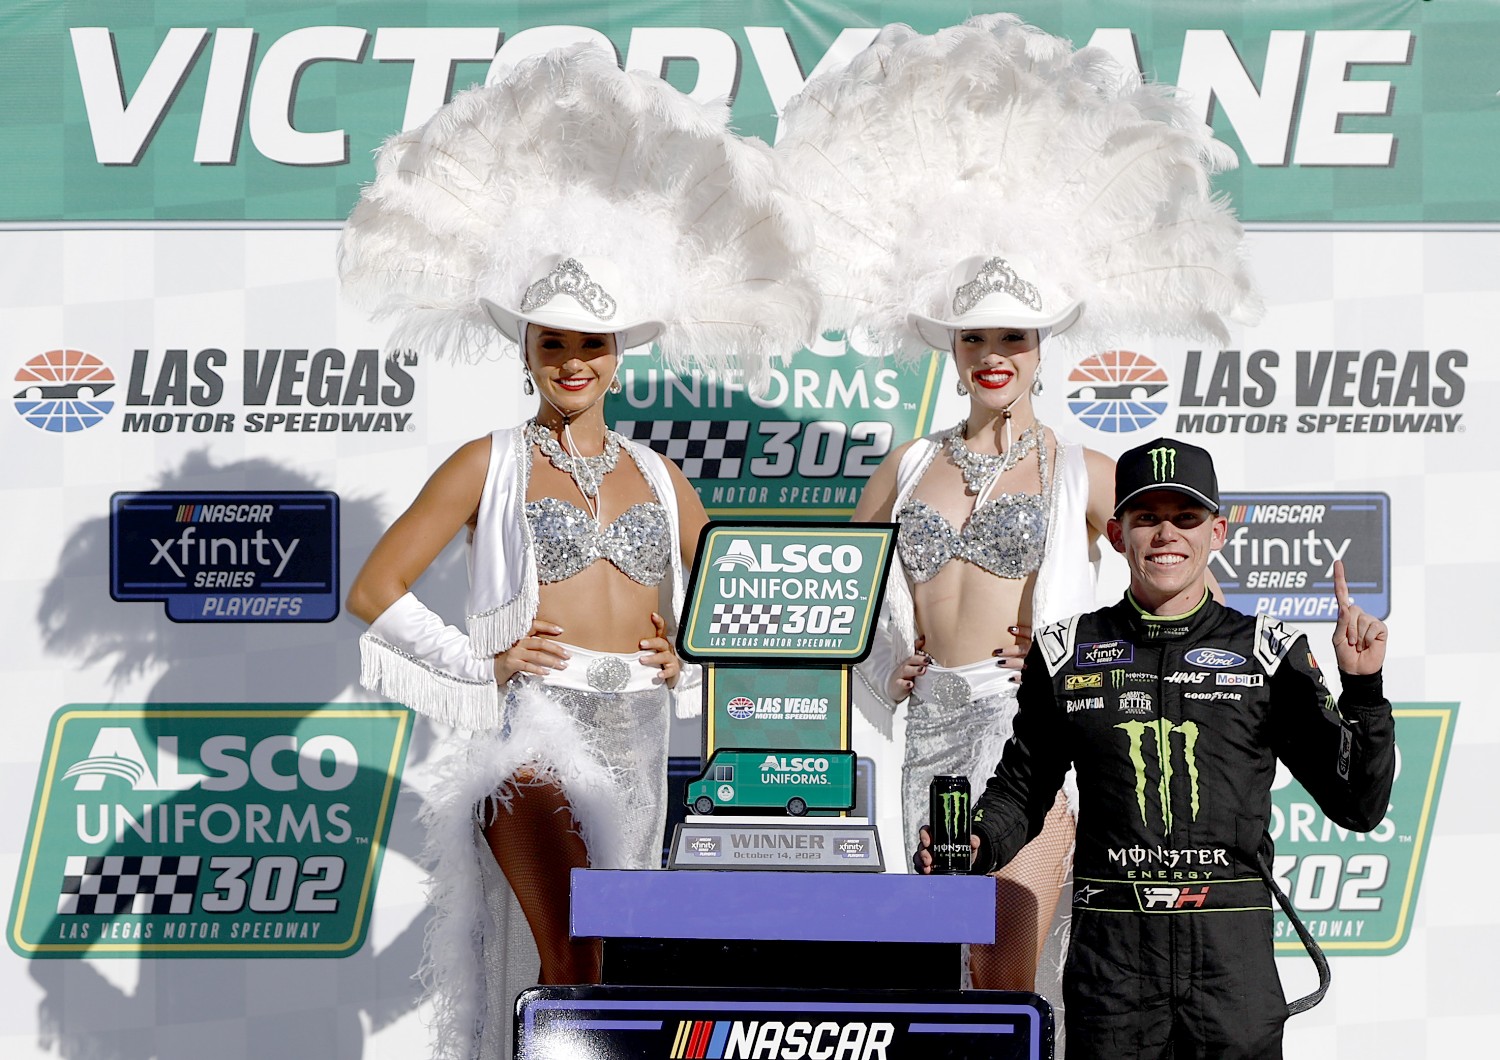 Riley Herbst, driver of the #98 Monster Energy Ford, celebrates in victory lane after winning the NASCAR Xfinity Series Alsco Uniforms 302 at Las Vegas Motor Speedway on October 14, 2023 in Las Vegas, Nevada. (Photo by Chris Graythen/Getty Images for NASCAR)